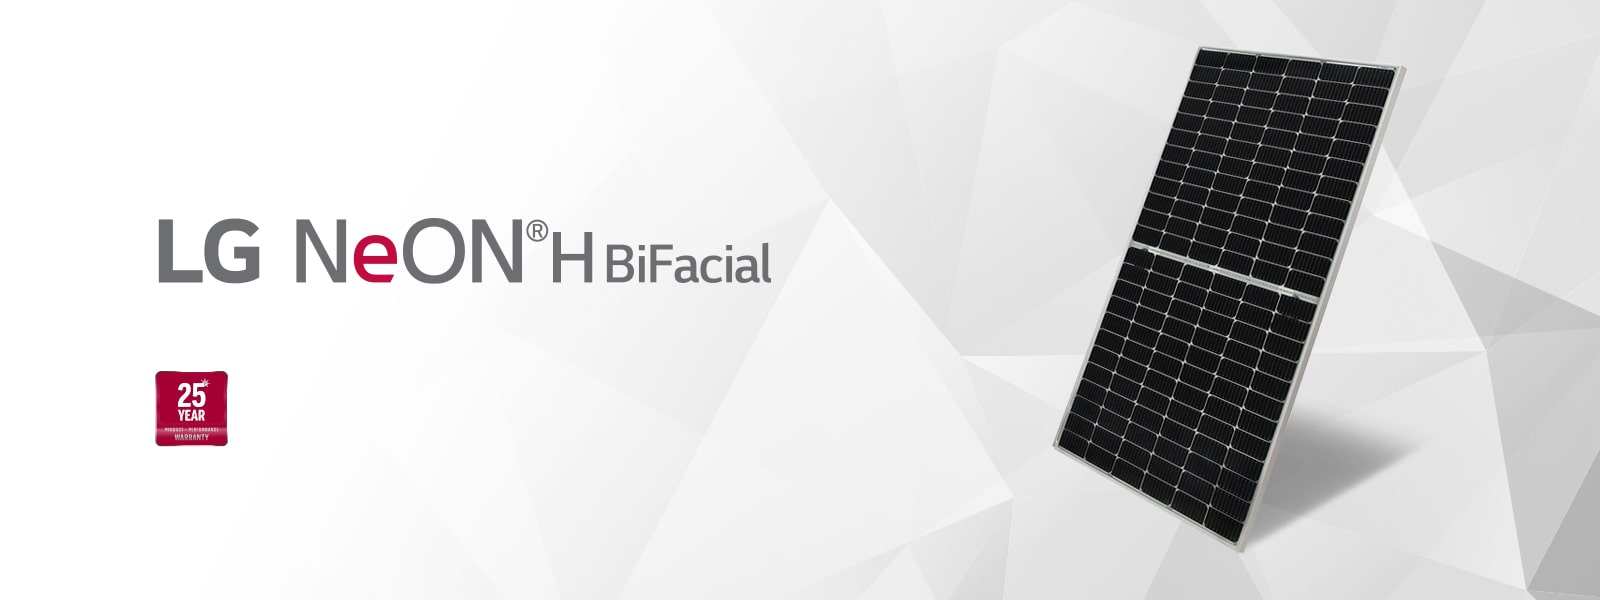 The LG NeON H BiFacial solar panel can achieve up to 30% more energy than the standard PV module. 